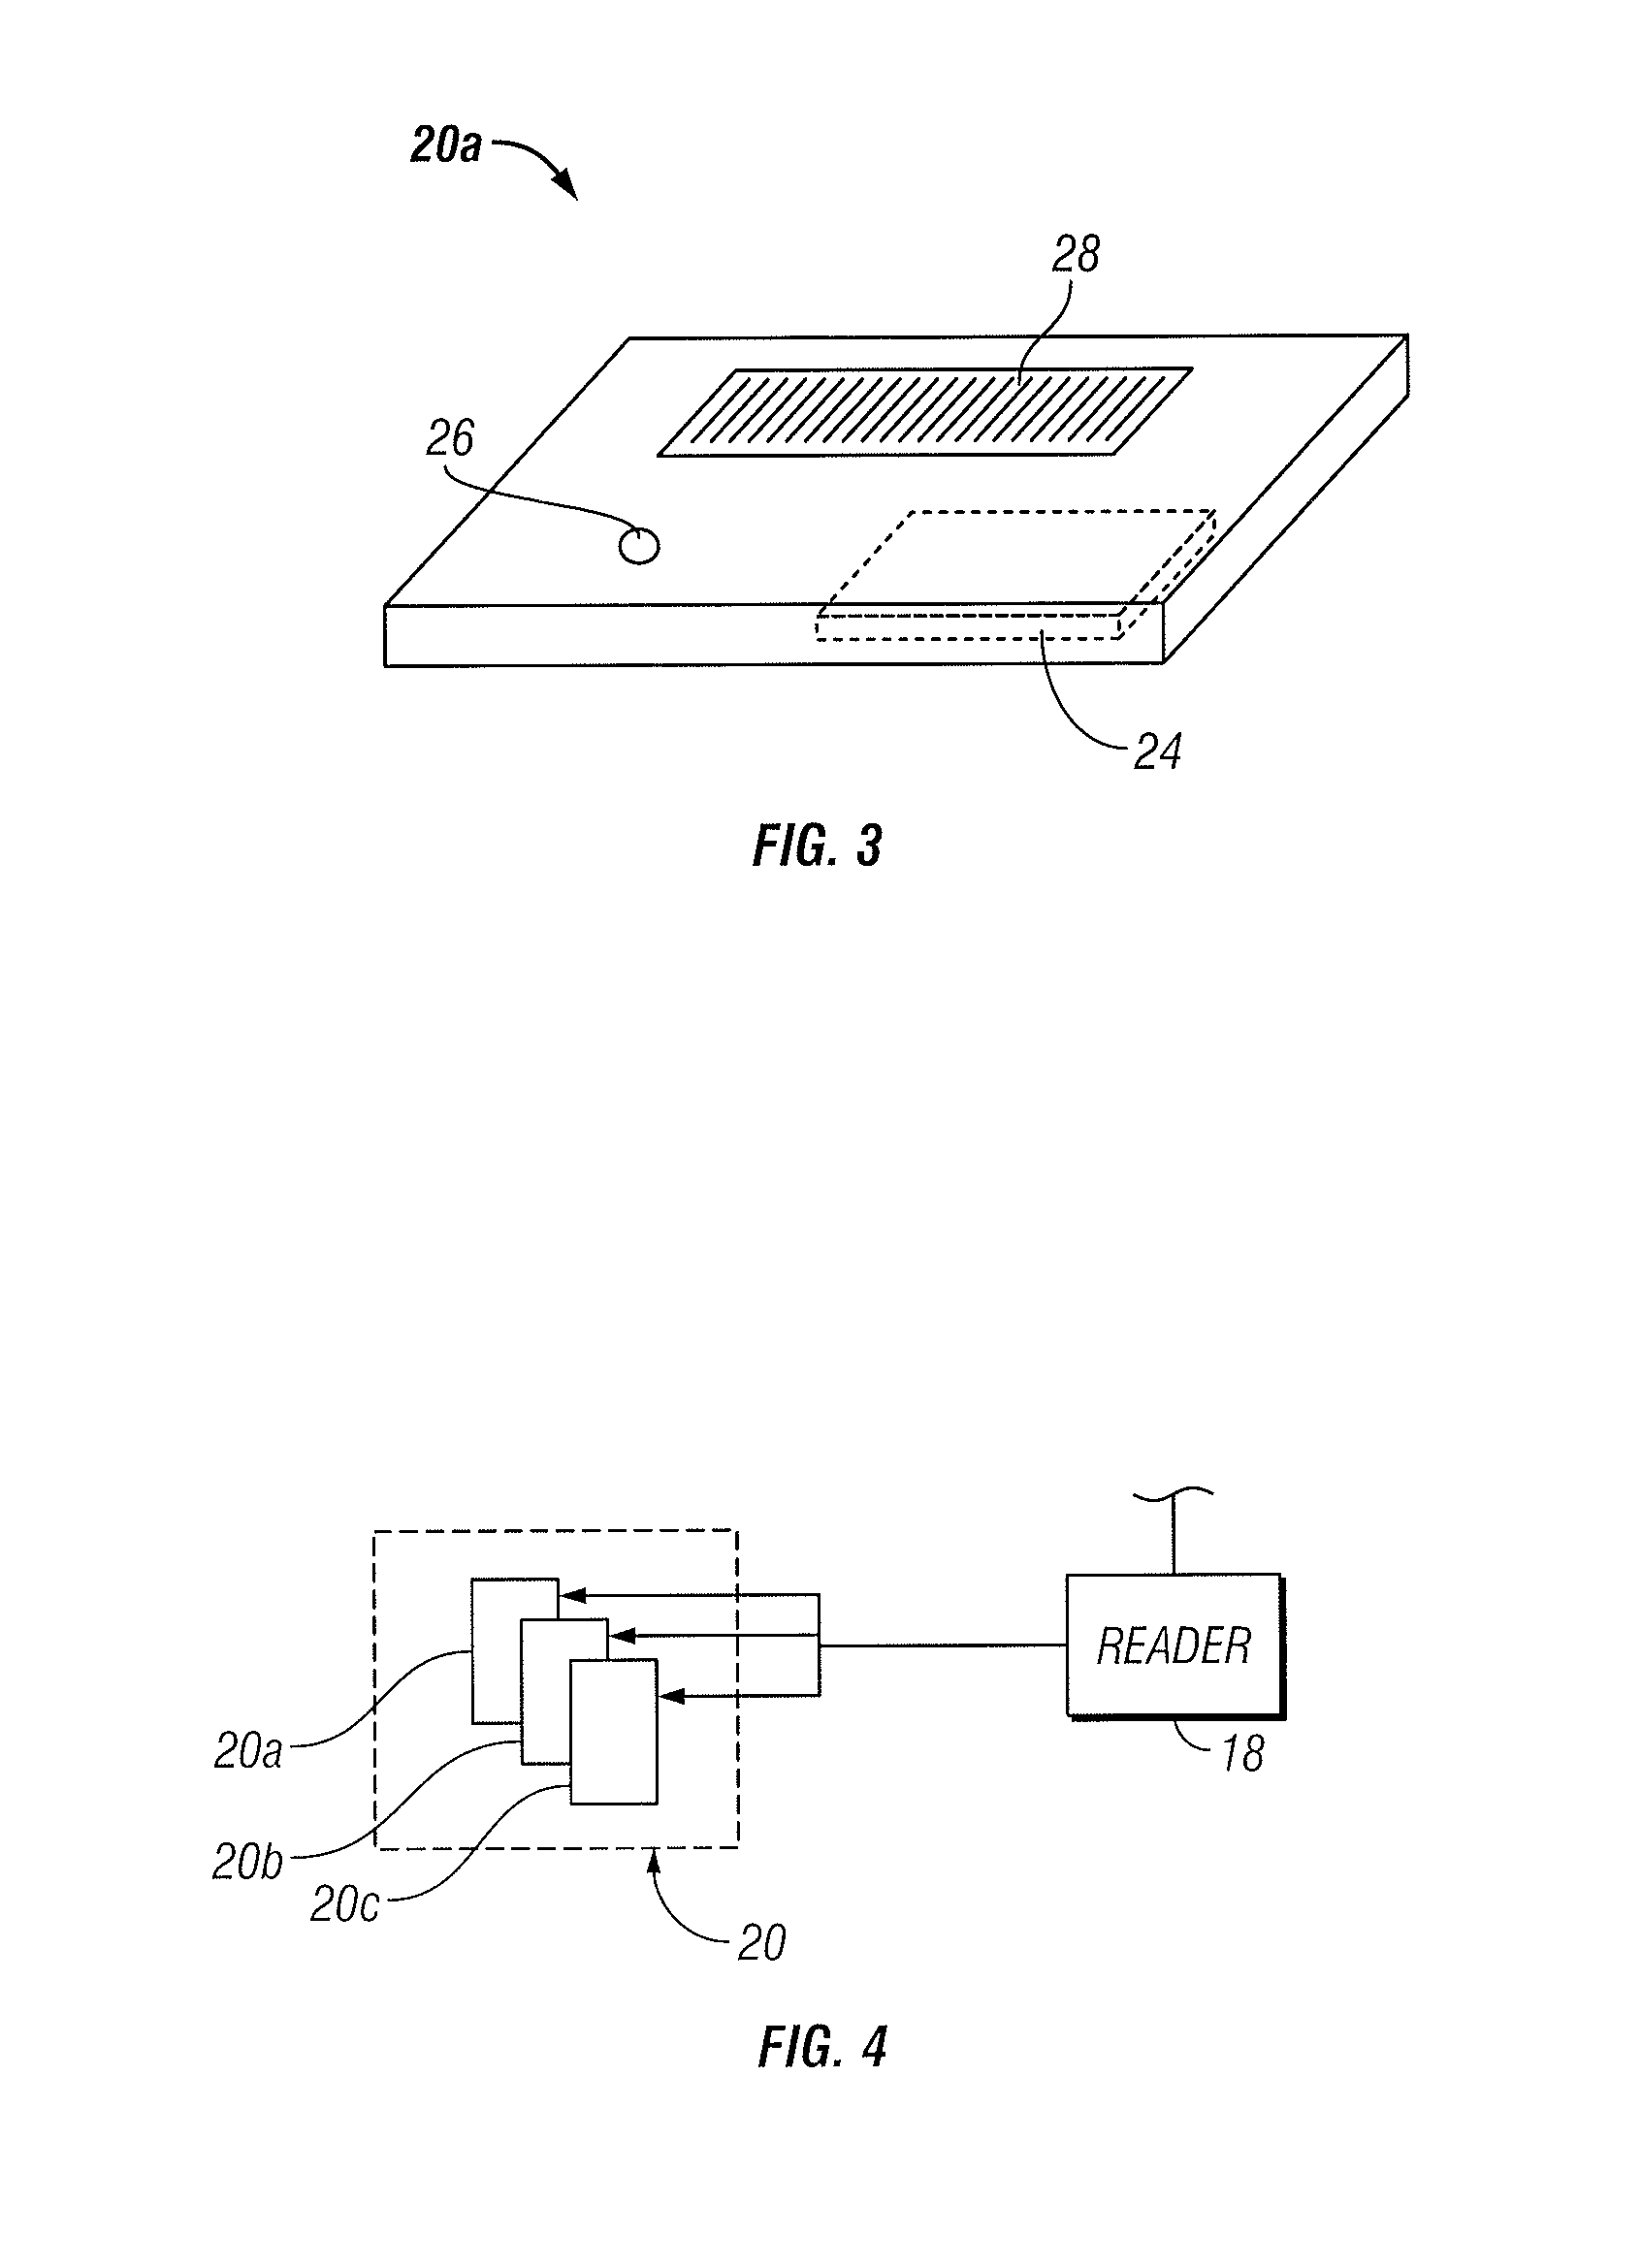 Electronic security system for monitoring and recording activity and data relating to institutions and clients thereof